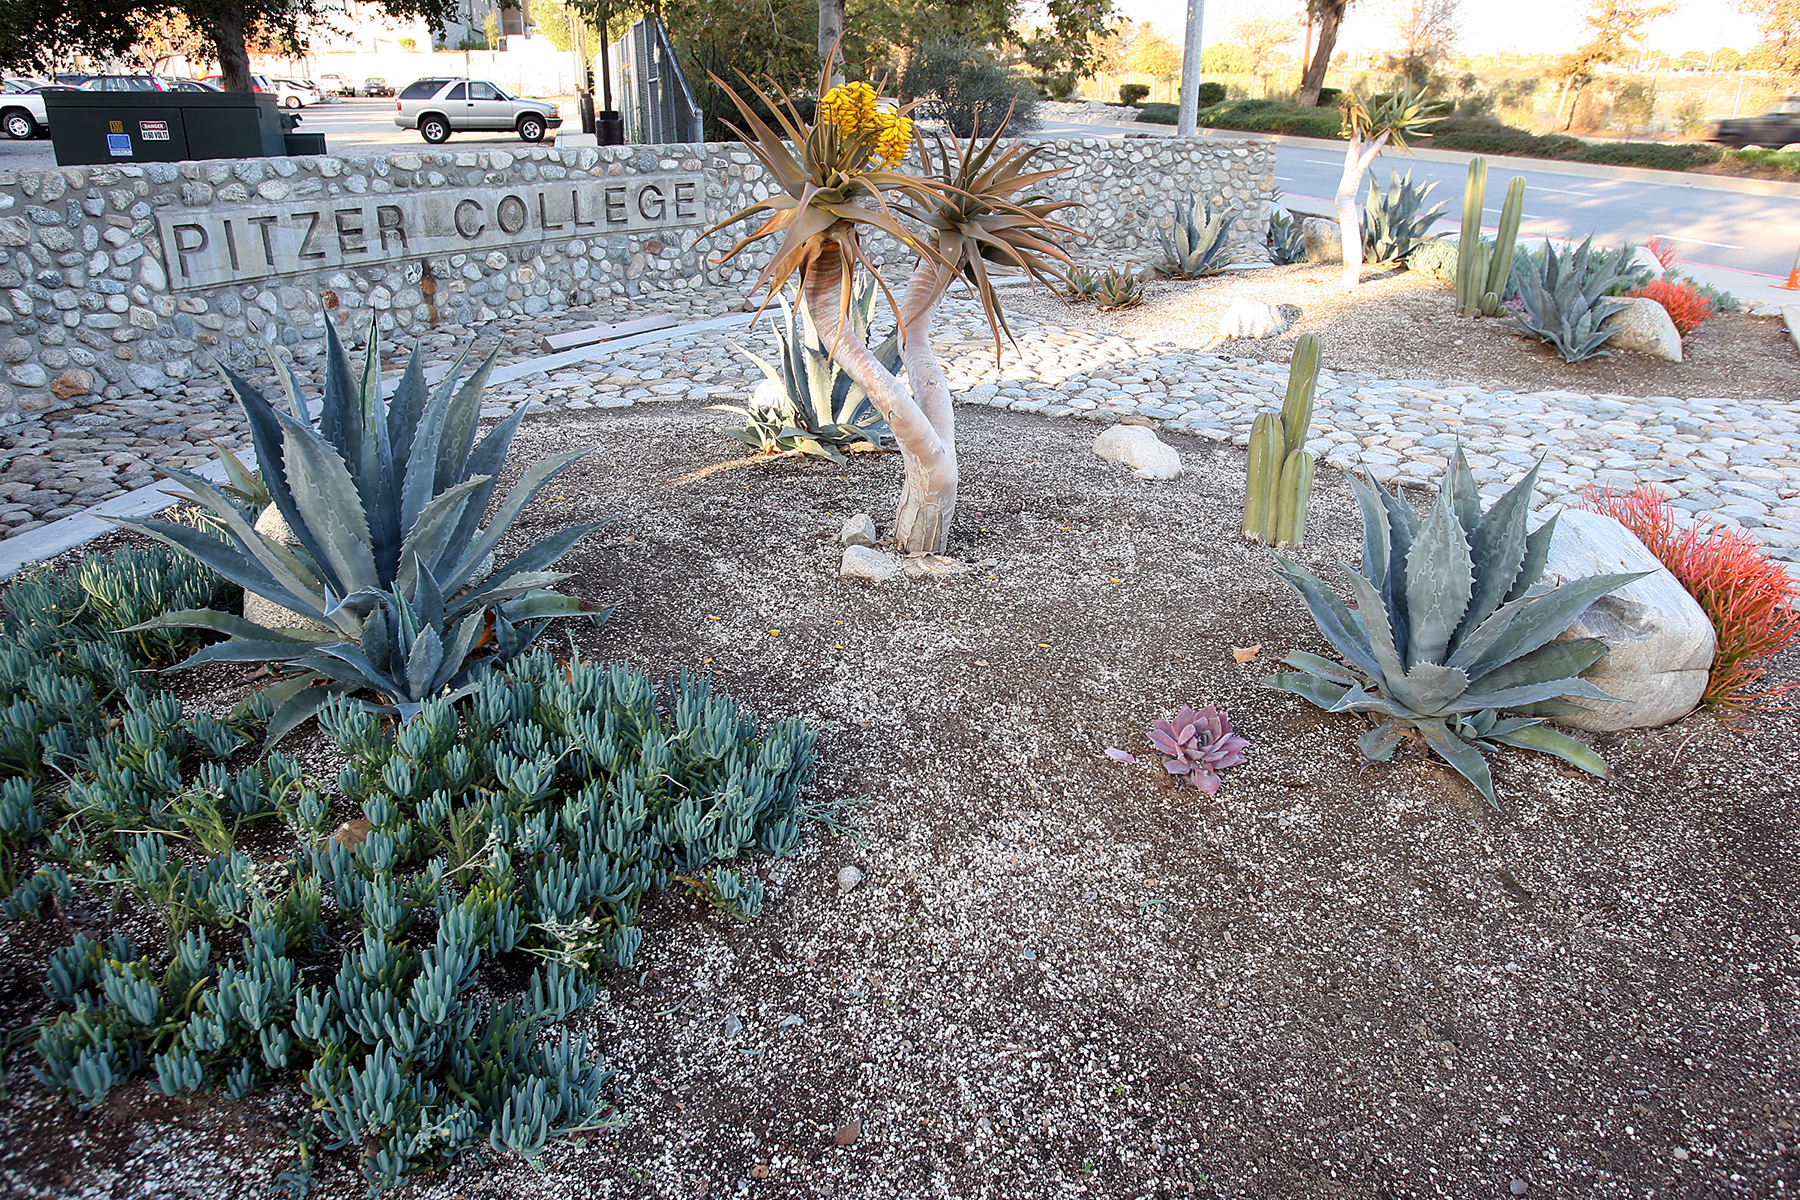 native landscaping at pitzer college in southern california uses less water than turf